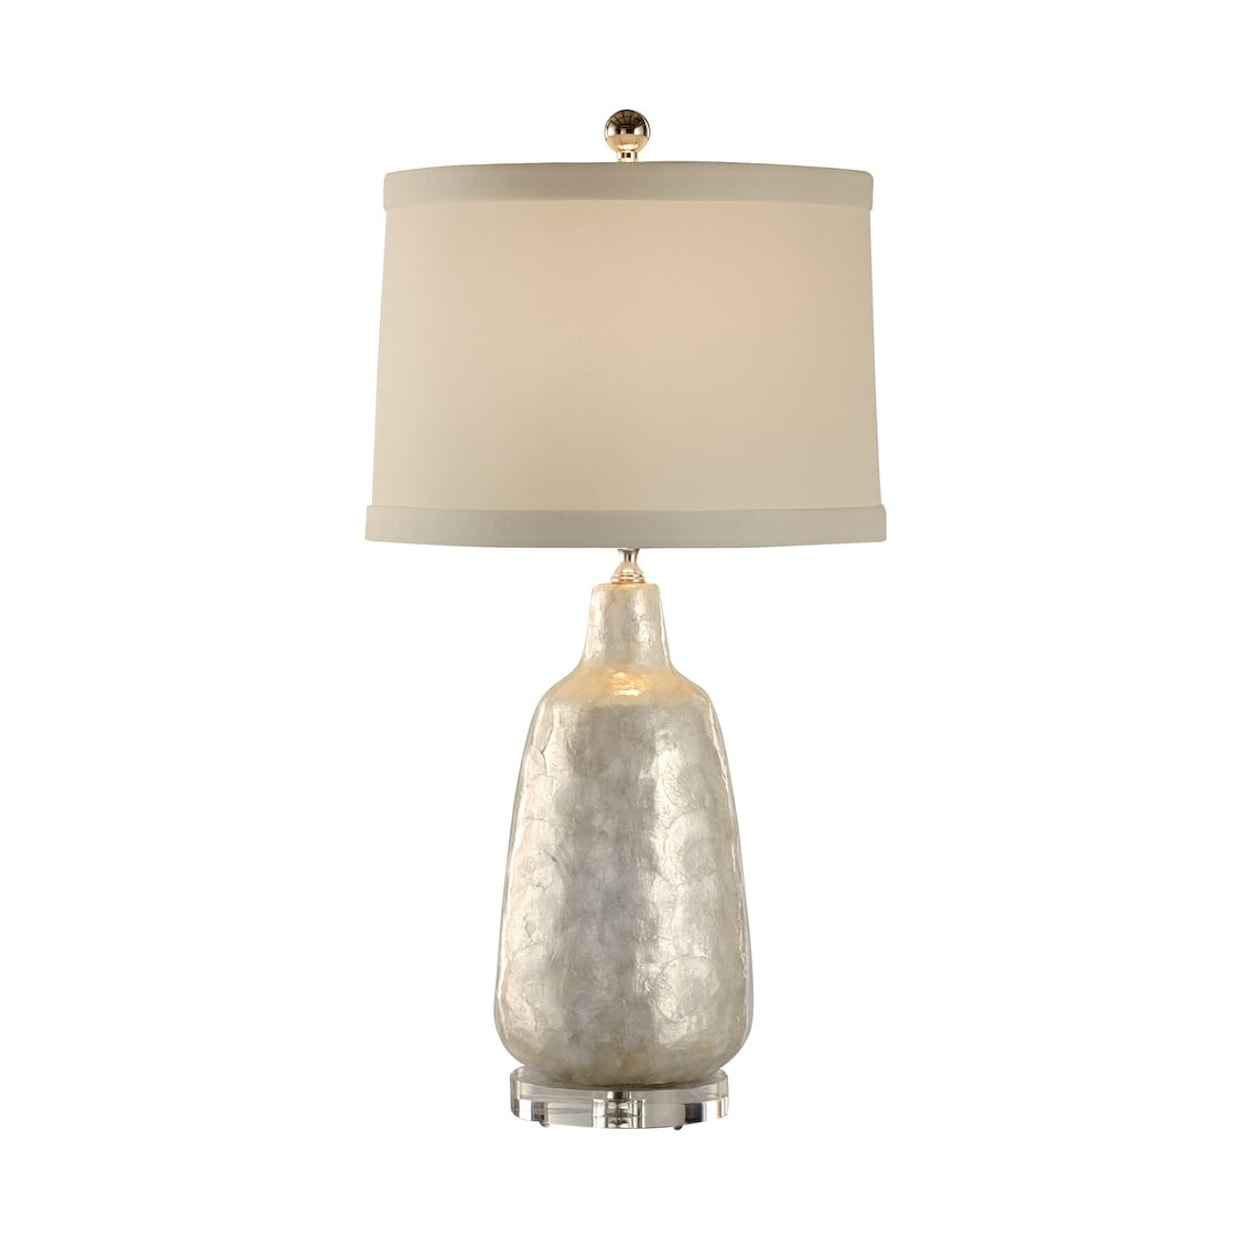 Wildwood Lamps Table Lamps Shell Covered Urn Lamp